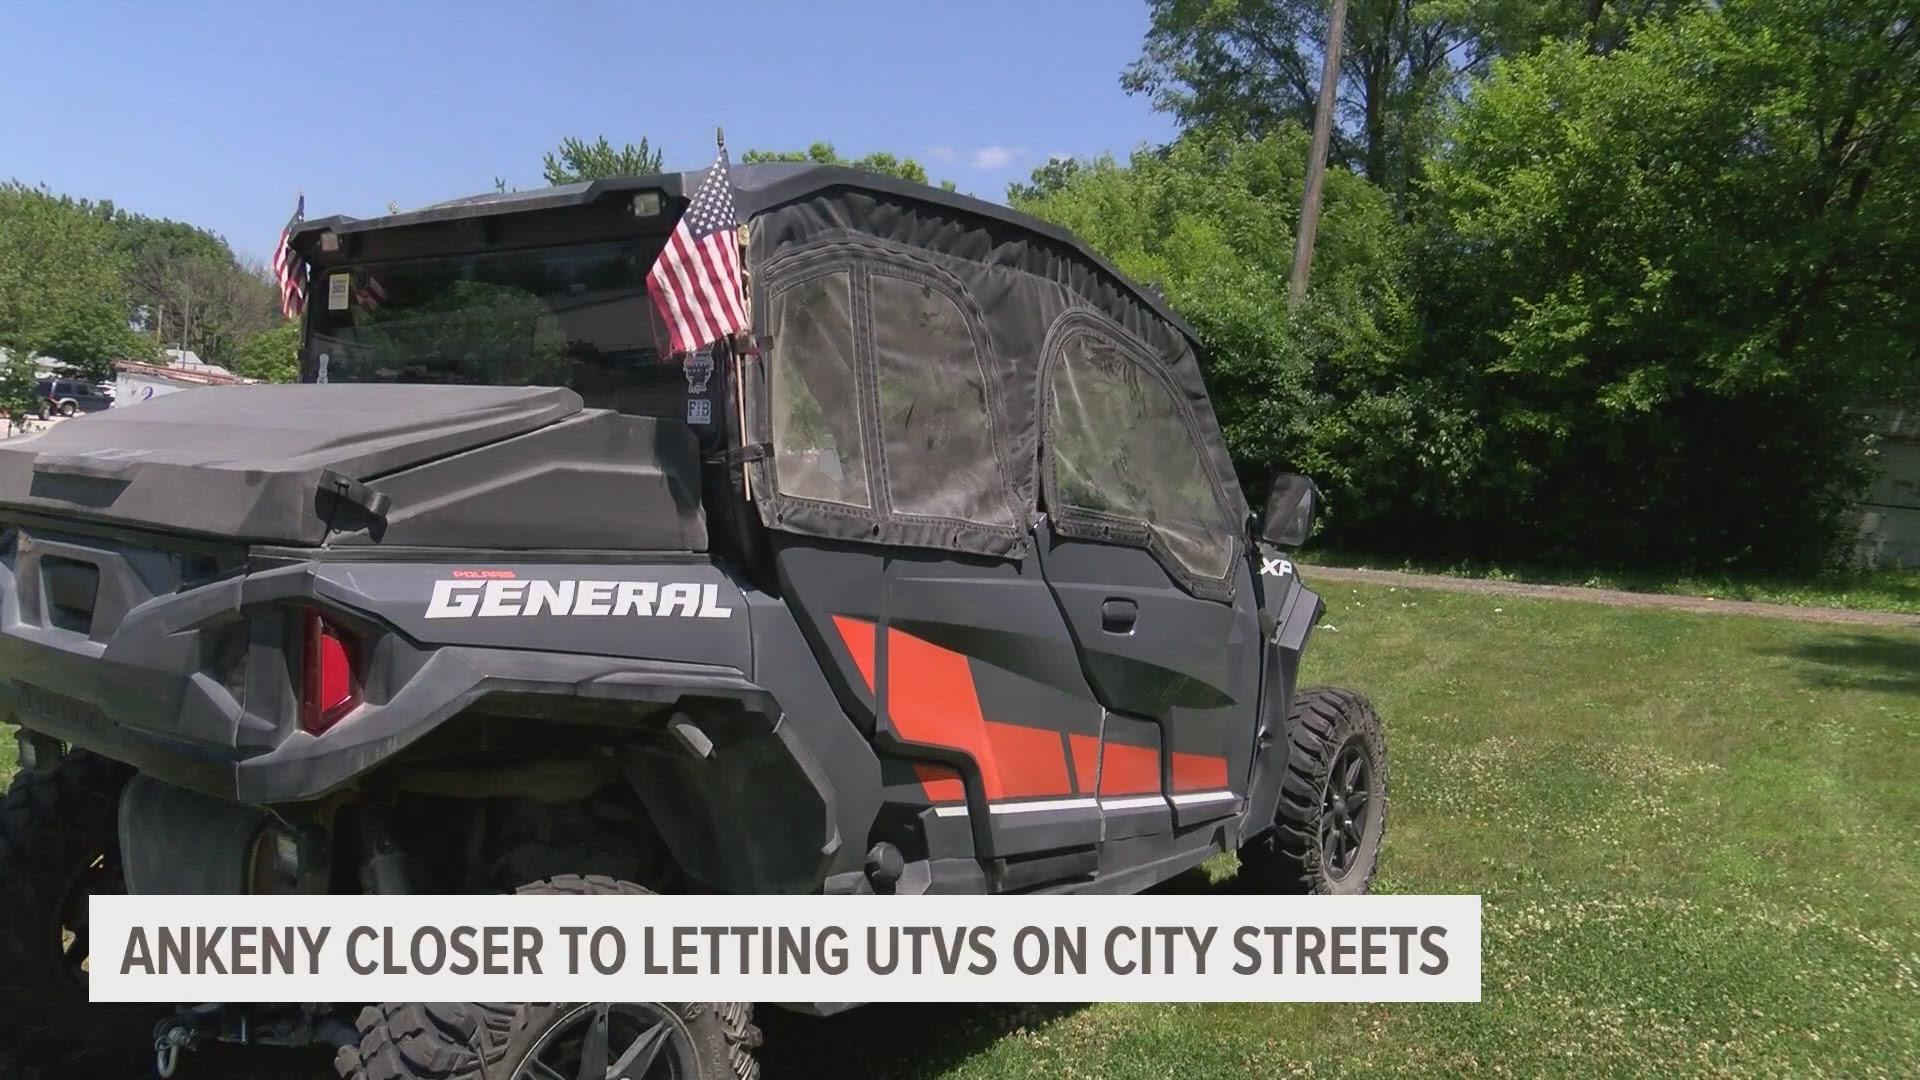 "Some people are unhappy with the UTVs, some people are really excited about the option," said Ankeny City Councilman Jeff Perry.